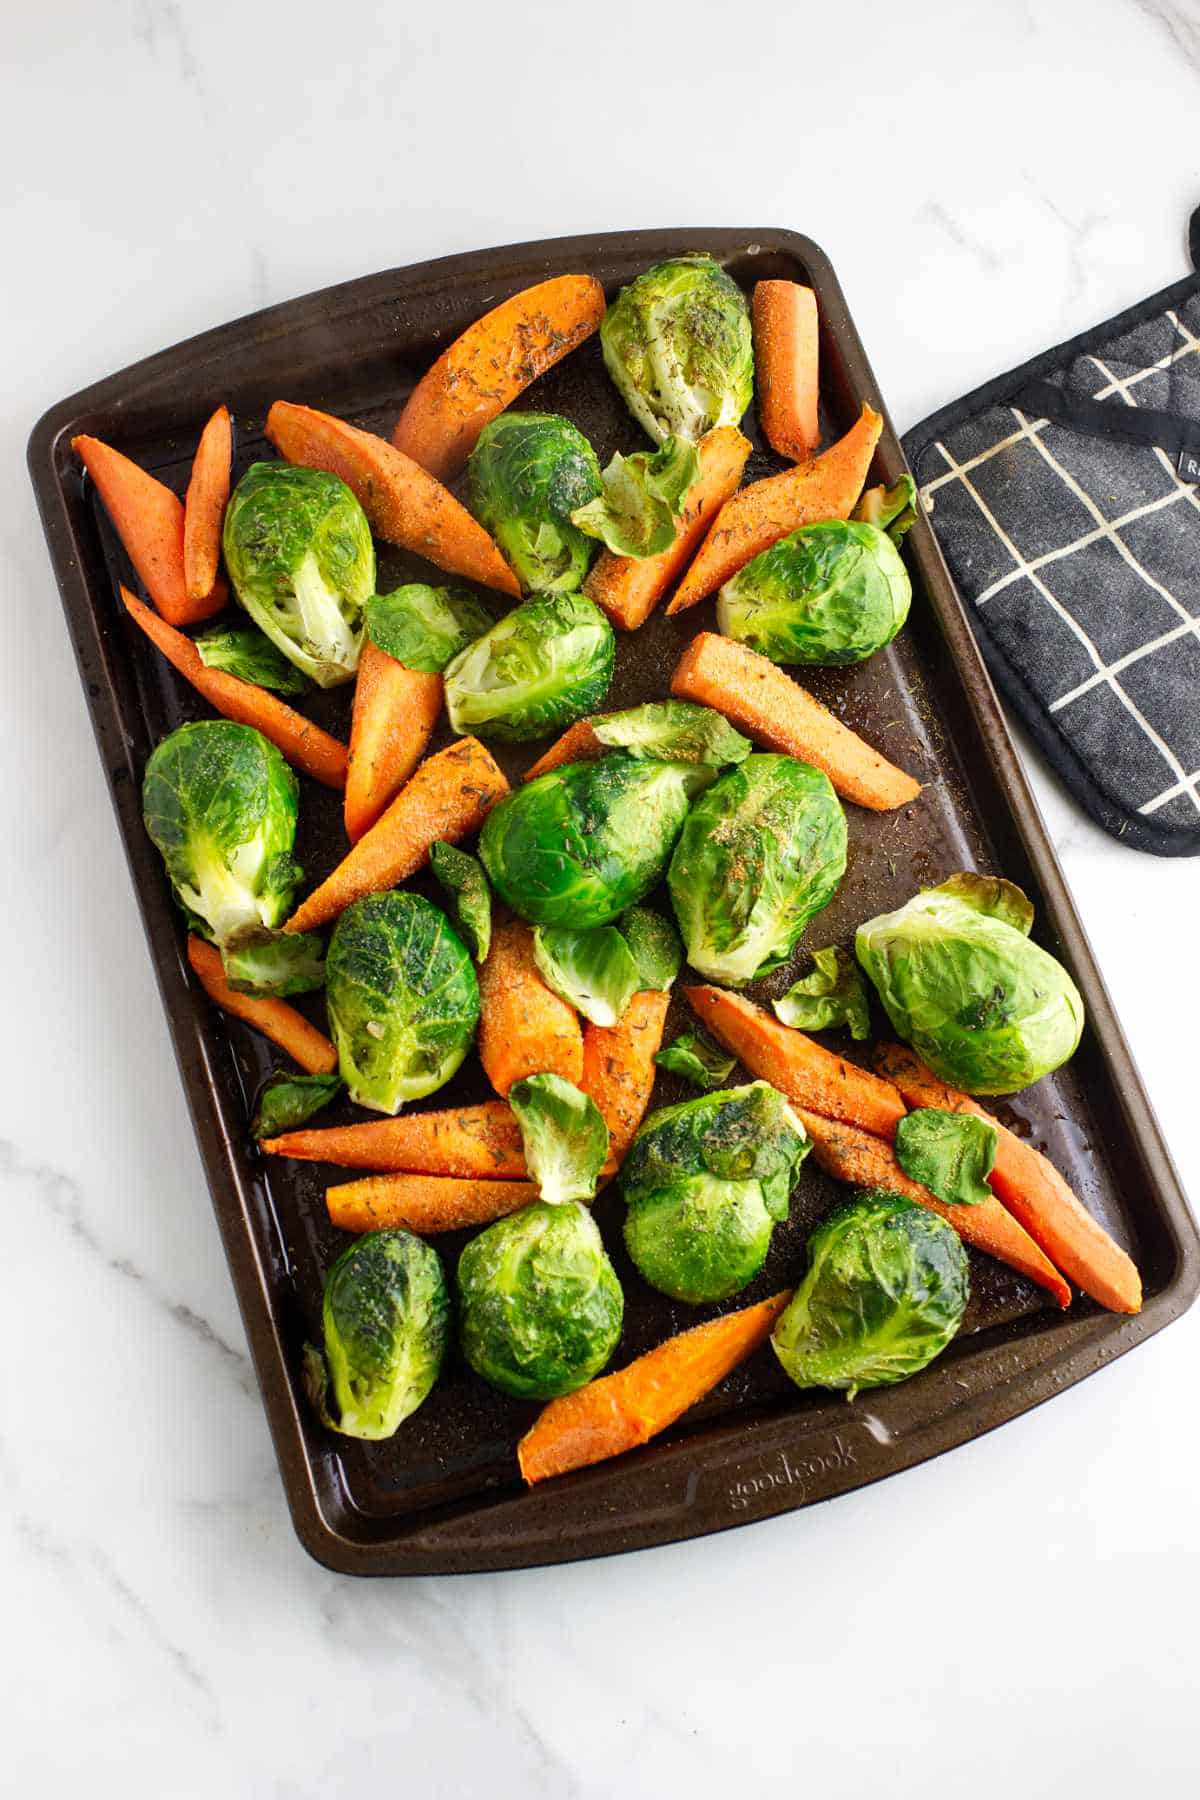 Roasted pan of seasoned carrots and brussels sprouts.